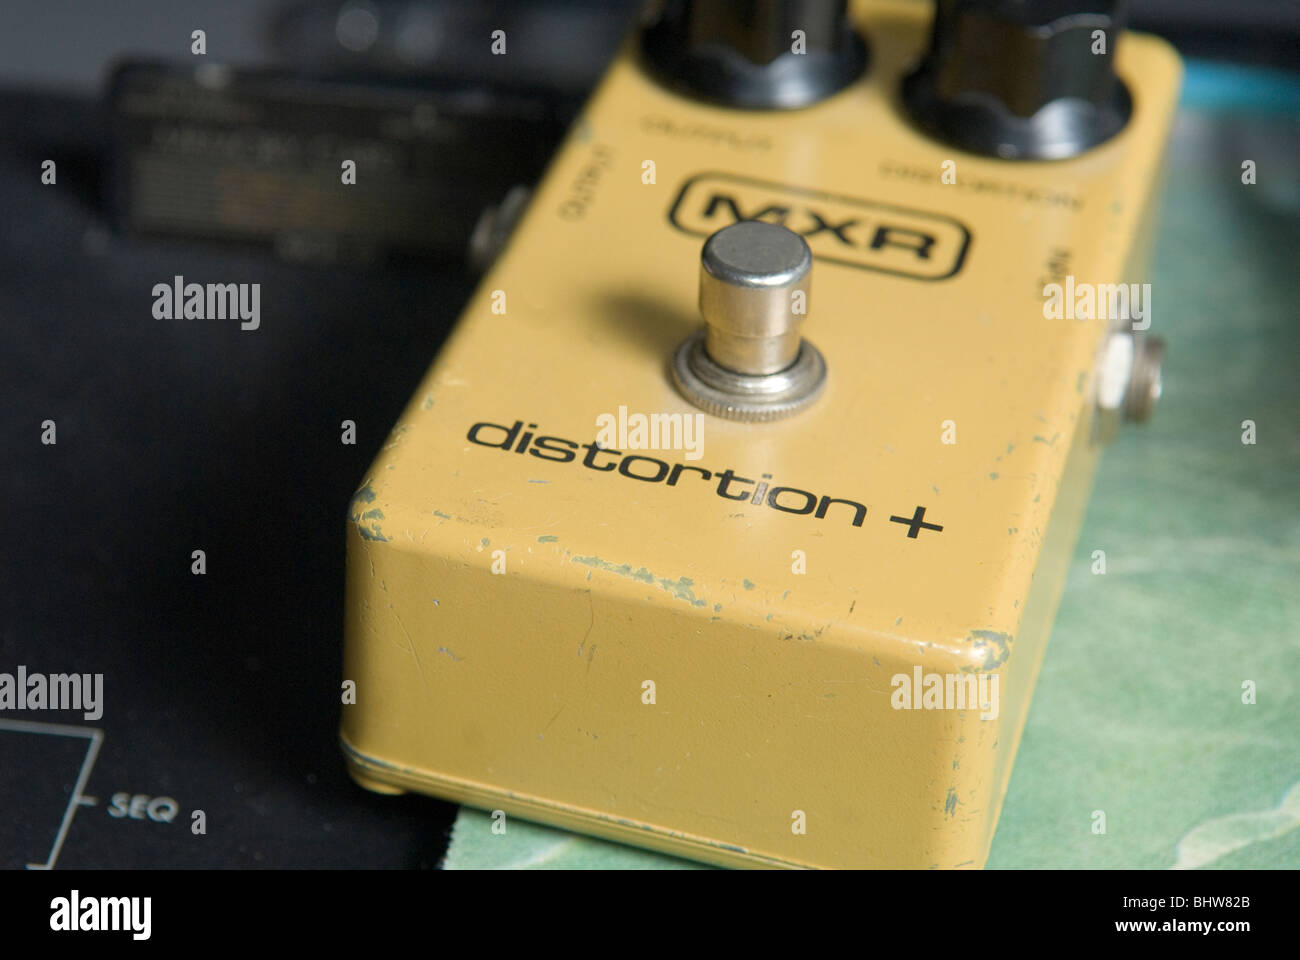 Distortion Pedal Stock Photo